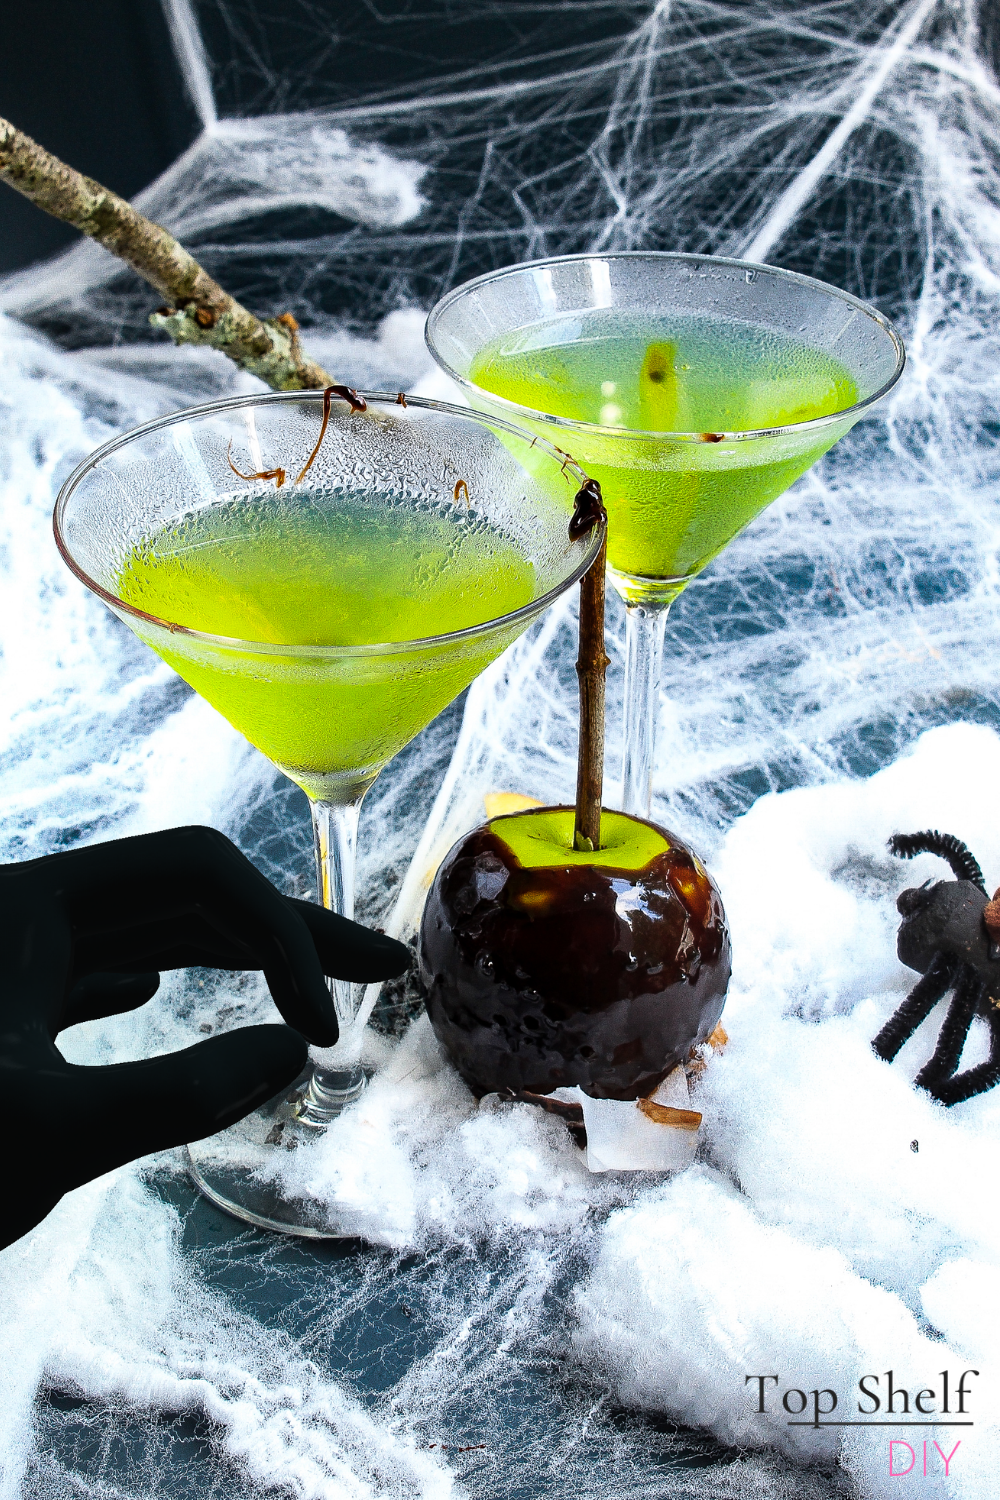 One whiff of this poison apple martini, and cocktail hour will never be the same. Get the recipe for three Halloween Cocktail appletini variations. #Halloweentreat
#Basiccocktailrecipes #Cocktailalcohol #Cocktailsmixology
#Gotcocktails #Cocktails and pretty drinks #Drinksandcocktailrecipes #Halloweencocktaildrinks
#HalloweenPartyFood